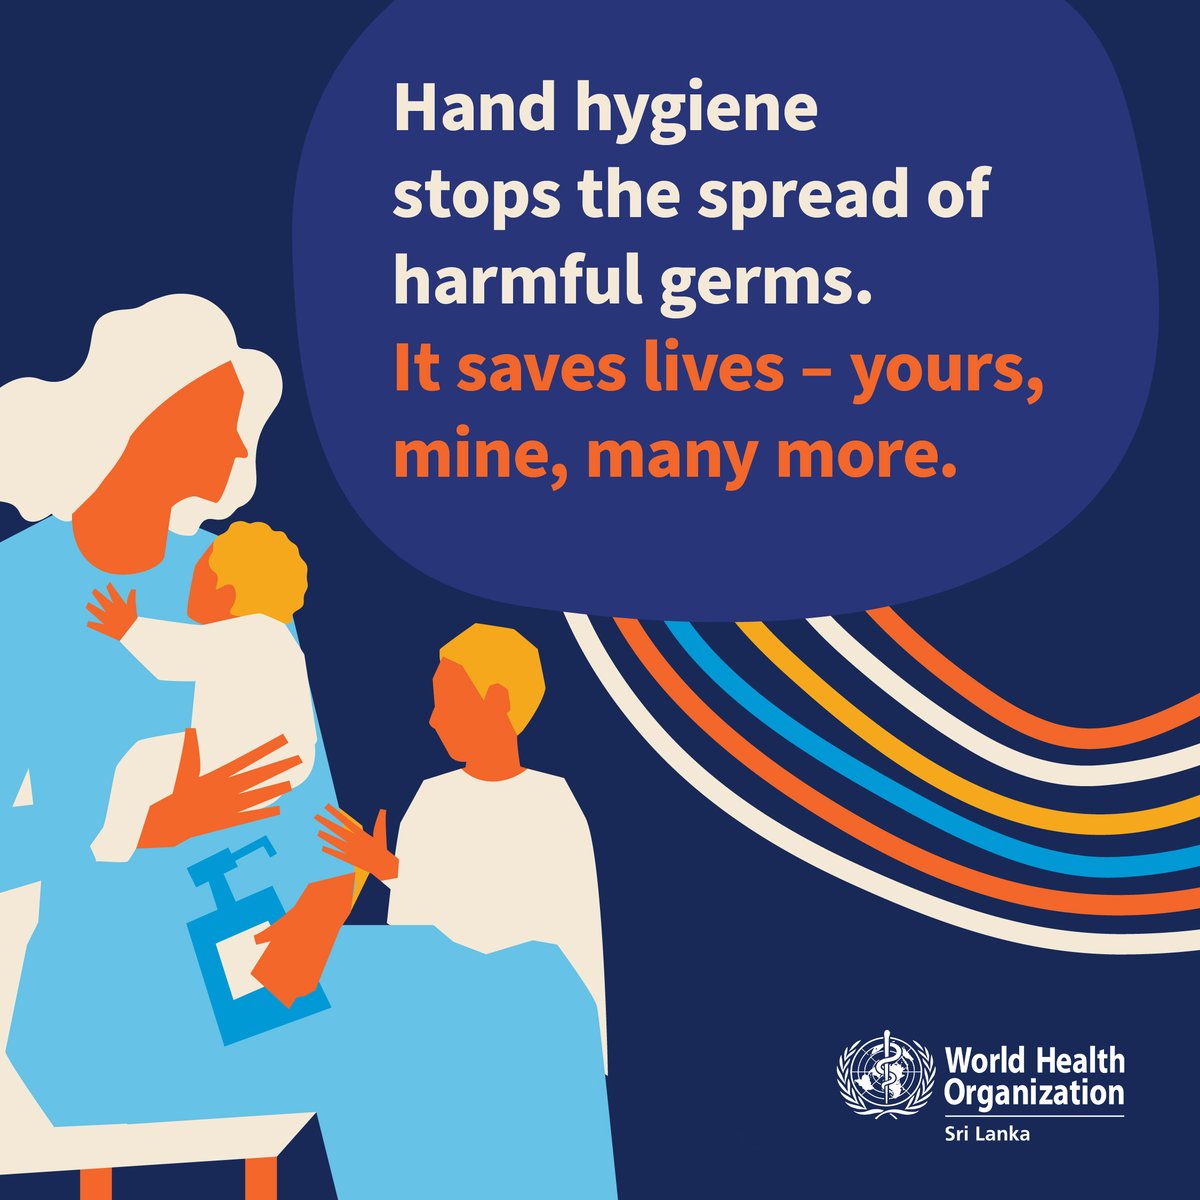 Clean hands, save lives! On #WorldHandHygieneDay, it's important to remember: a simple act like handwashing prevents illness and protects everyone. #SaveLivesCleanHands @WHOSEARO @MoH_SriLanka